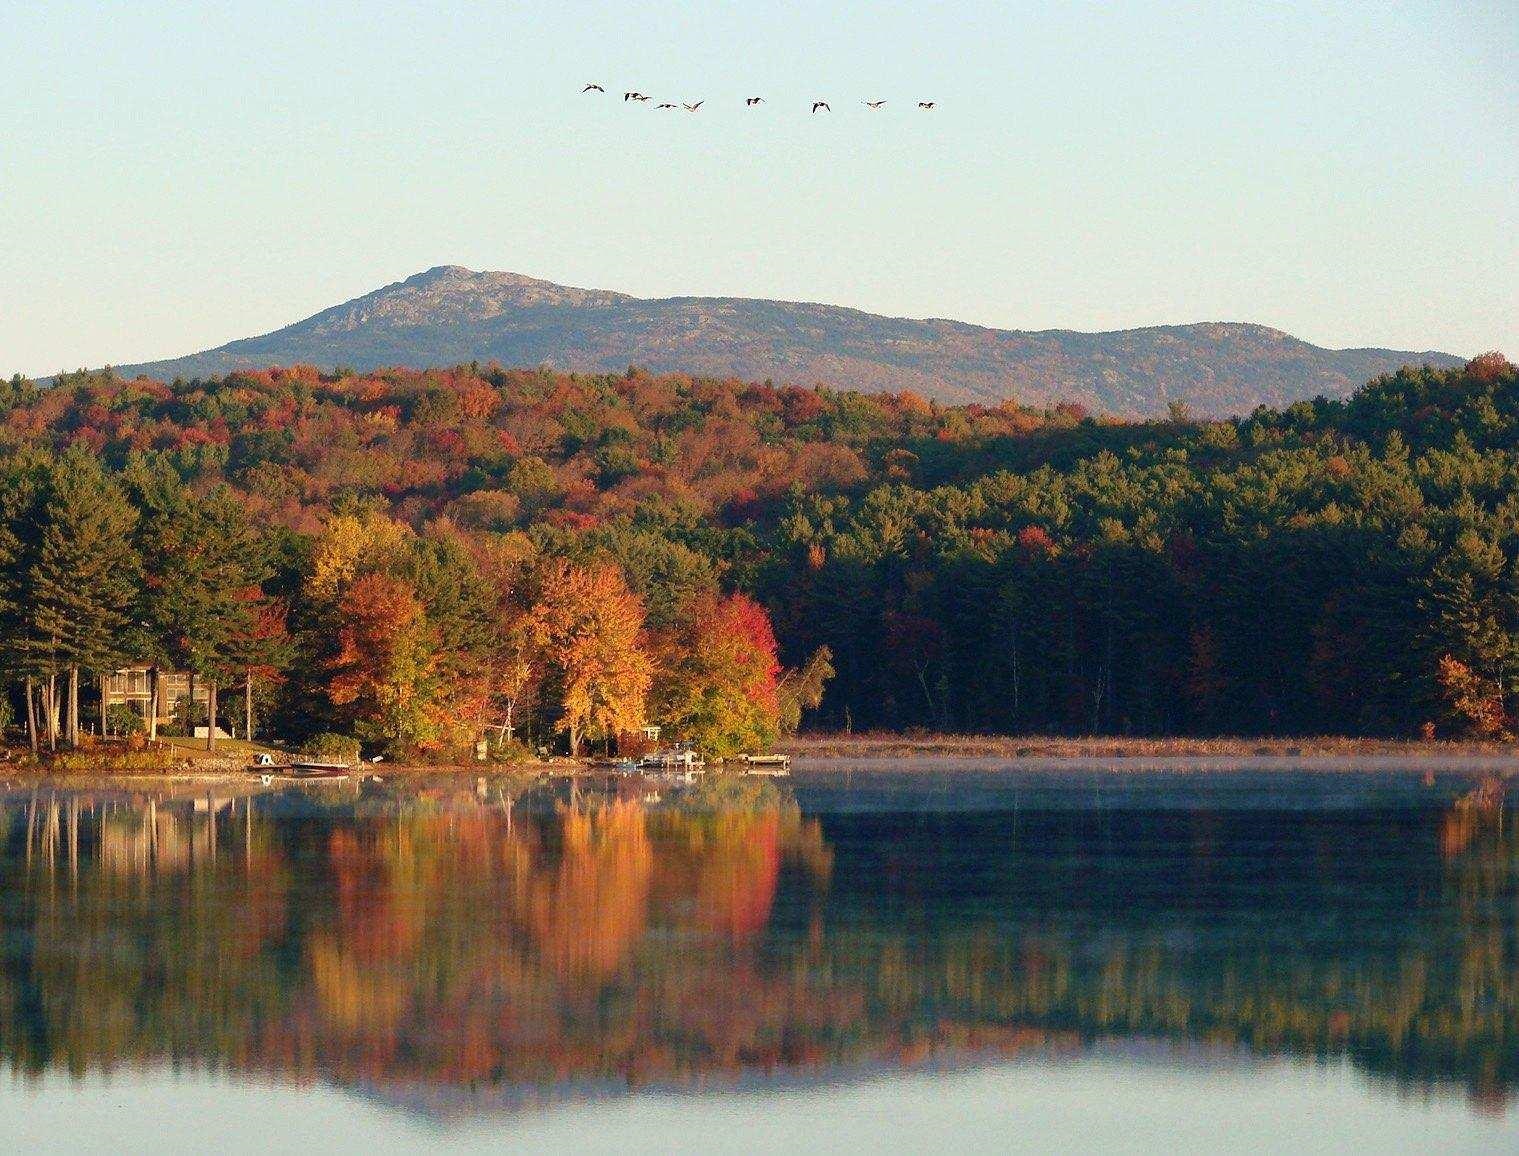 View of the Lake with Mt Monadnock in background taken by a neighbor